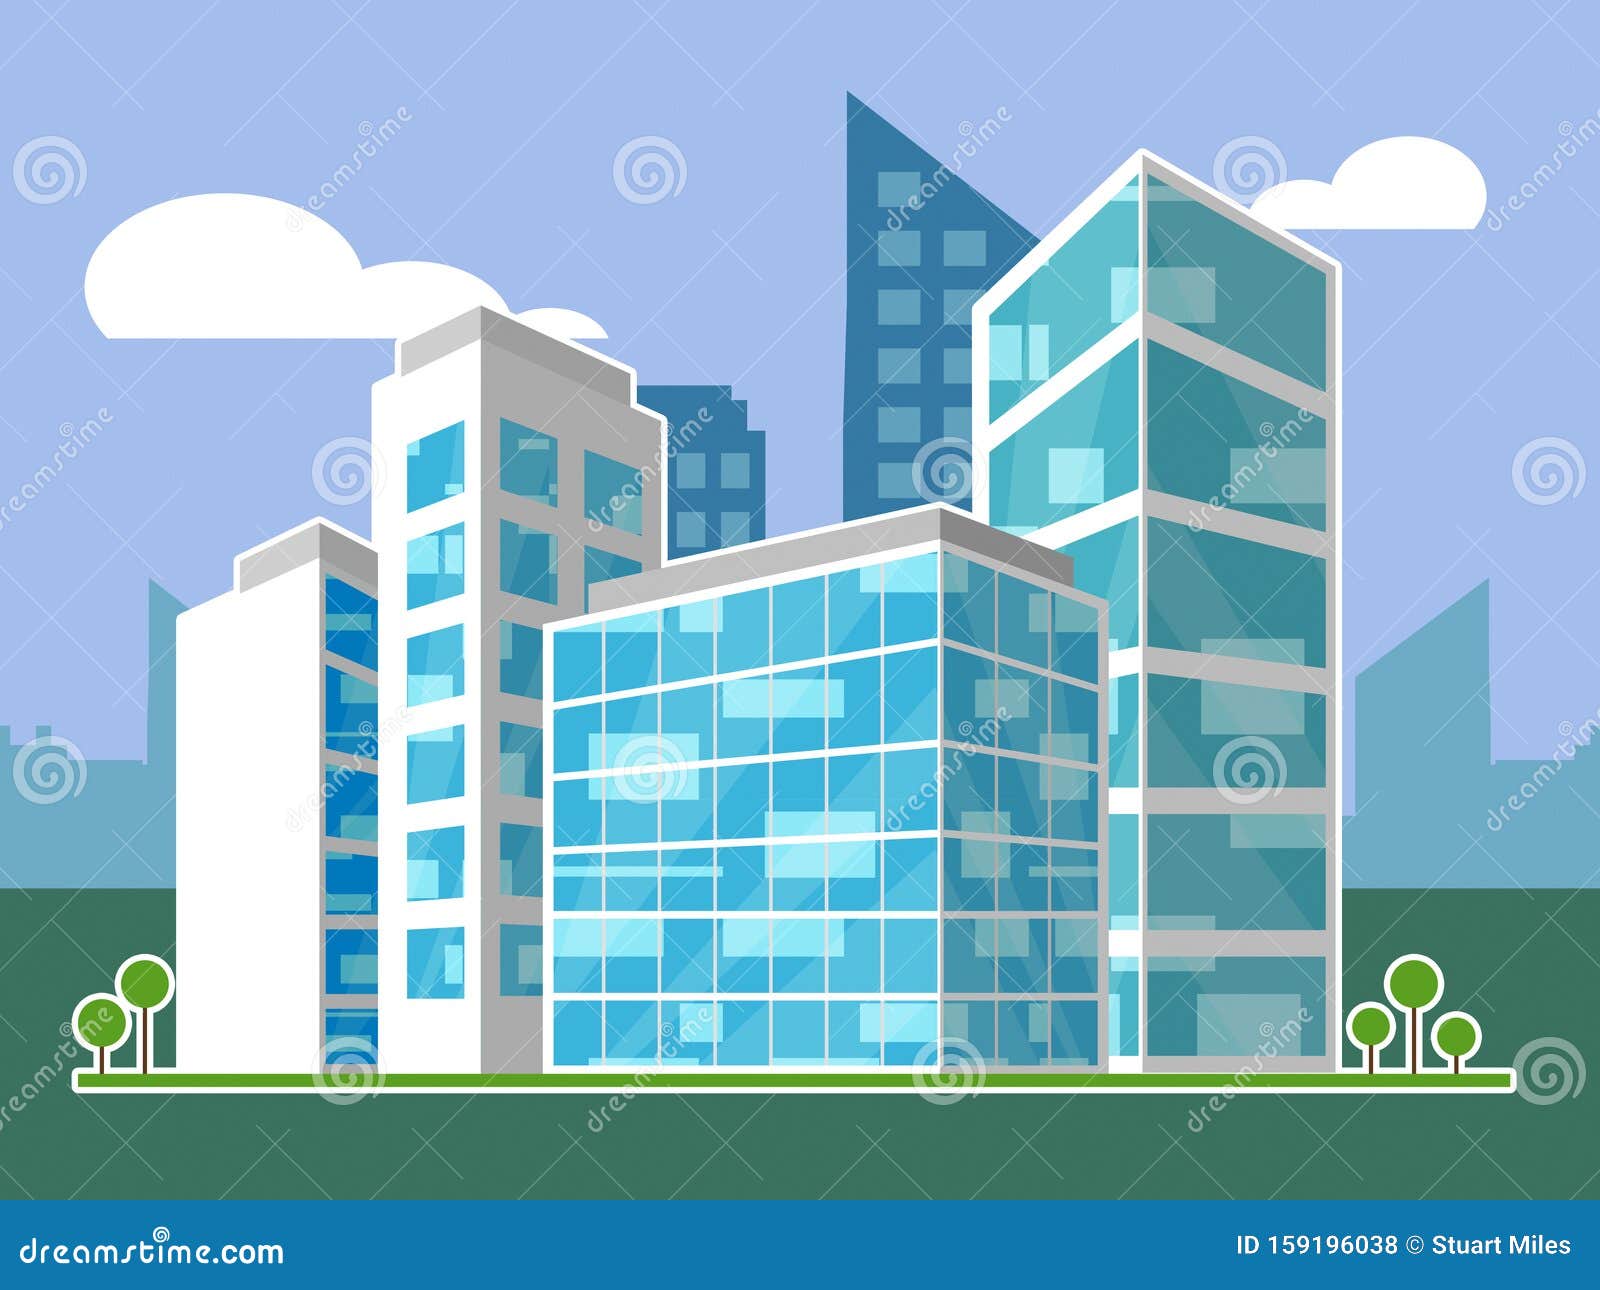 commercial real estate apartments represent property leasing or realestate investment - 3d 